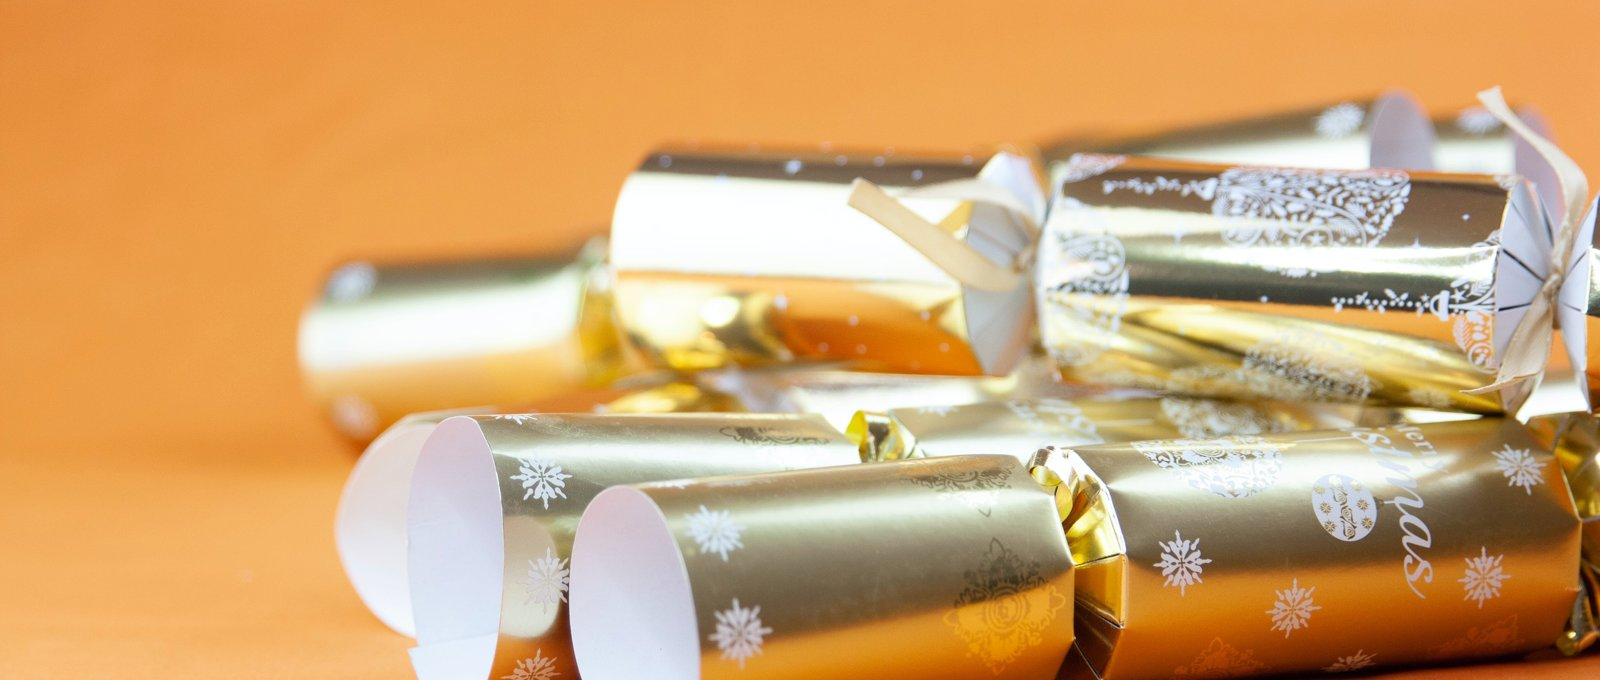 Gold Christmas crackers on an orange background